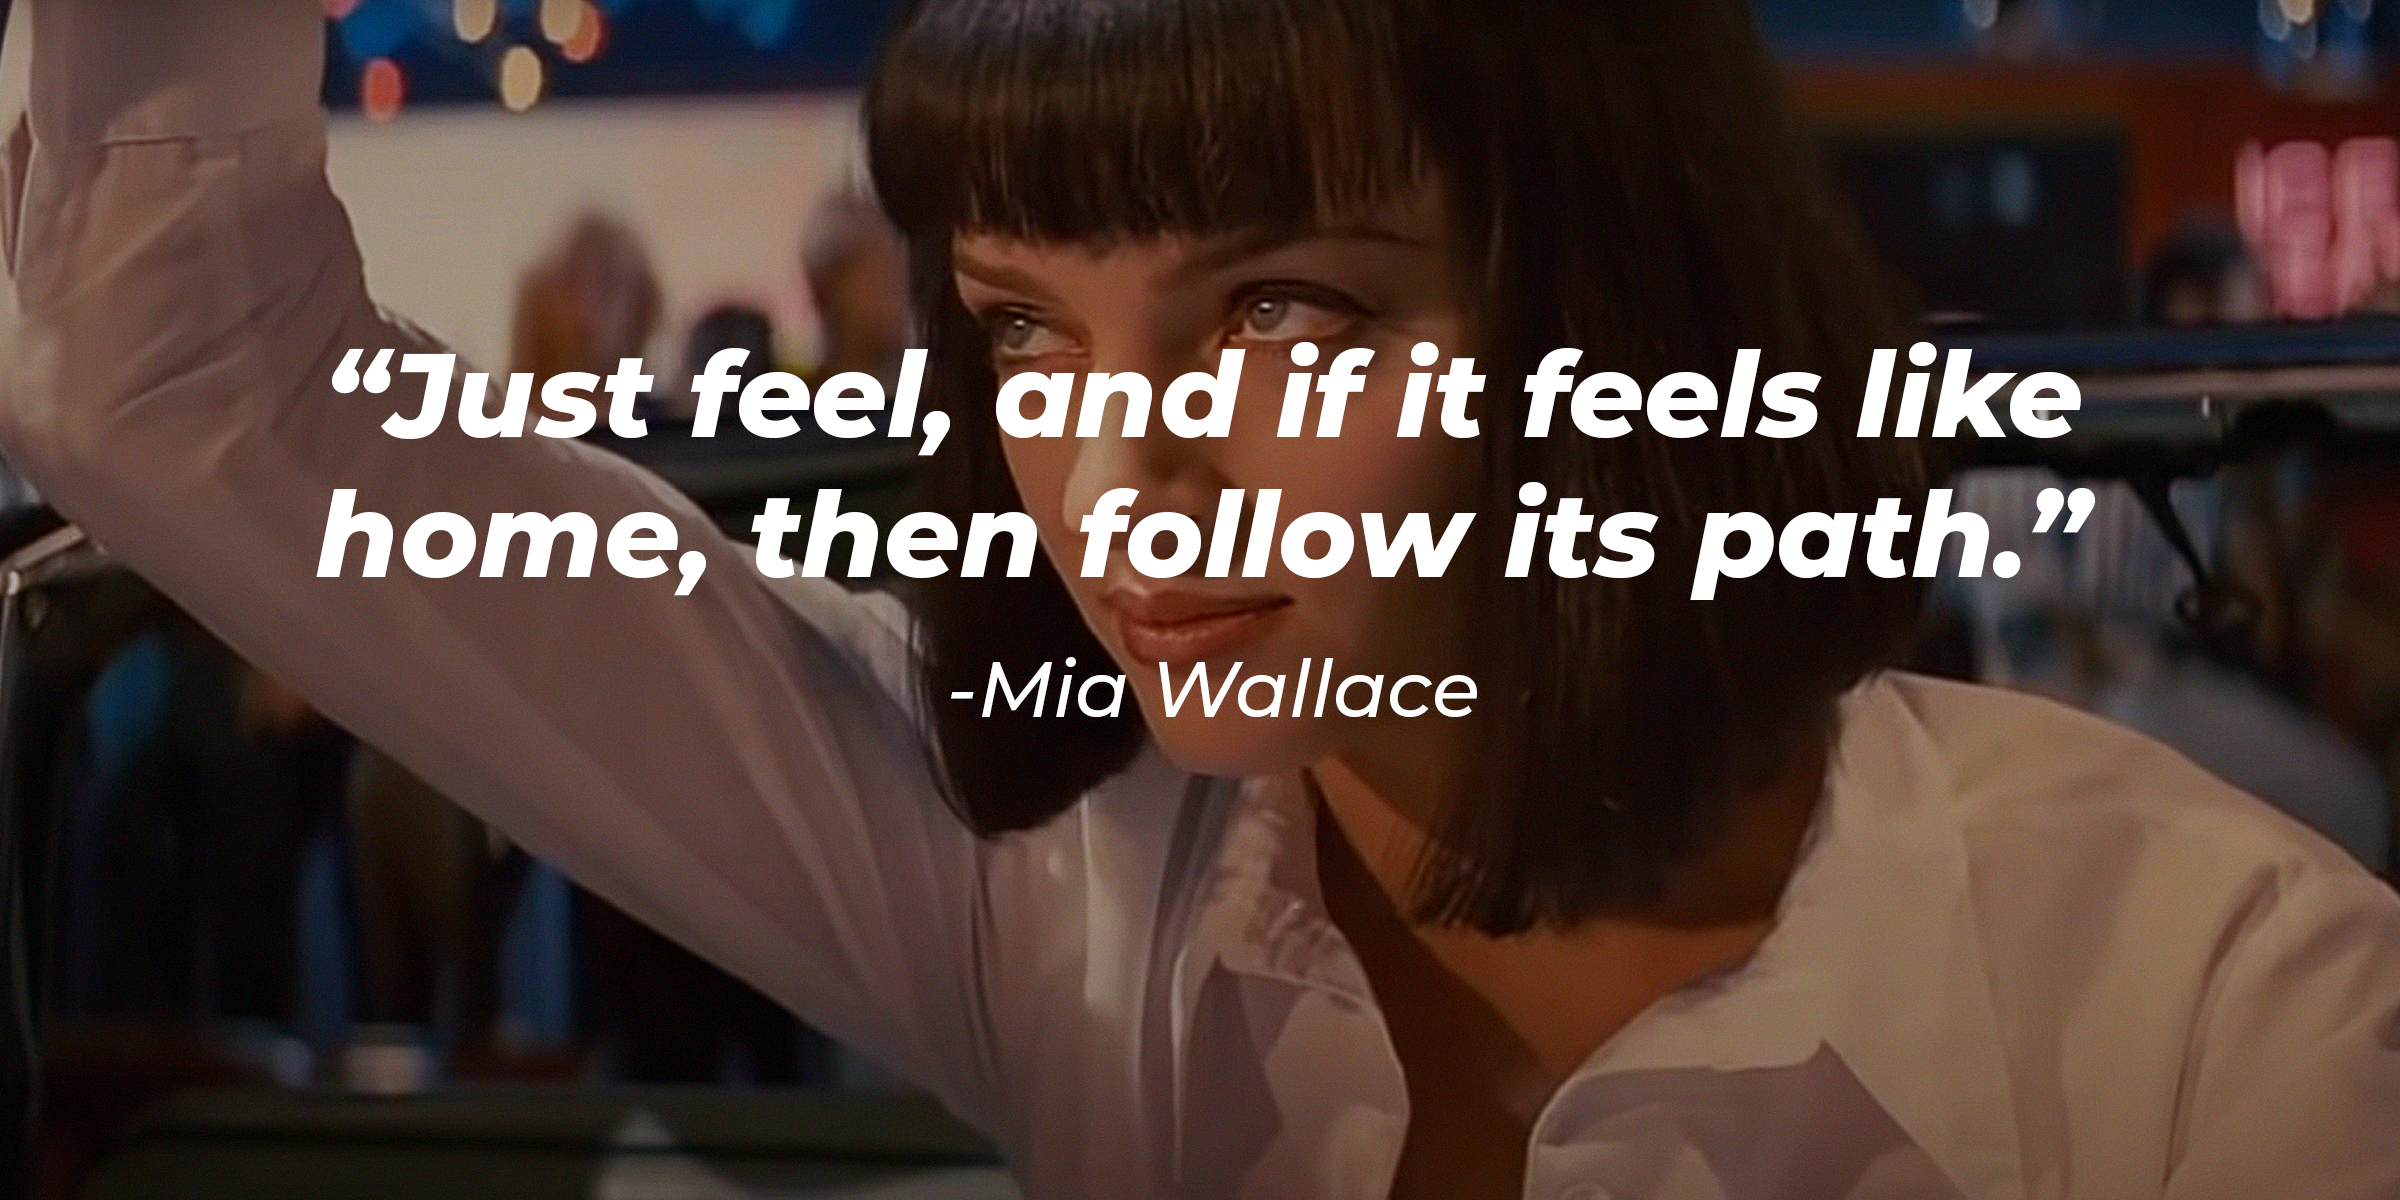 A picture of Mia Wallace with her quote: “Just feel, and if it feels like home, then follow its path.” | Source: youtube.com/miramax